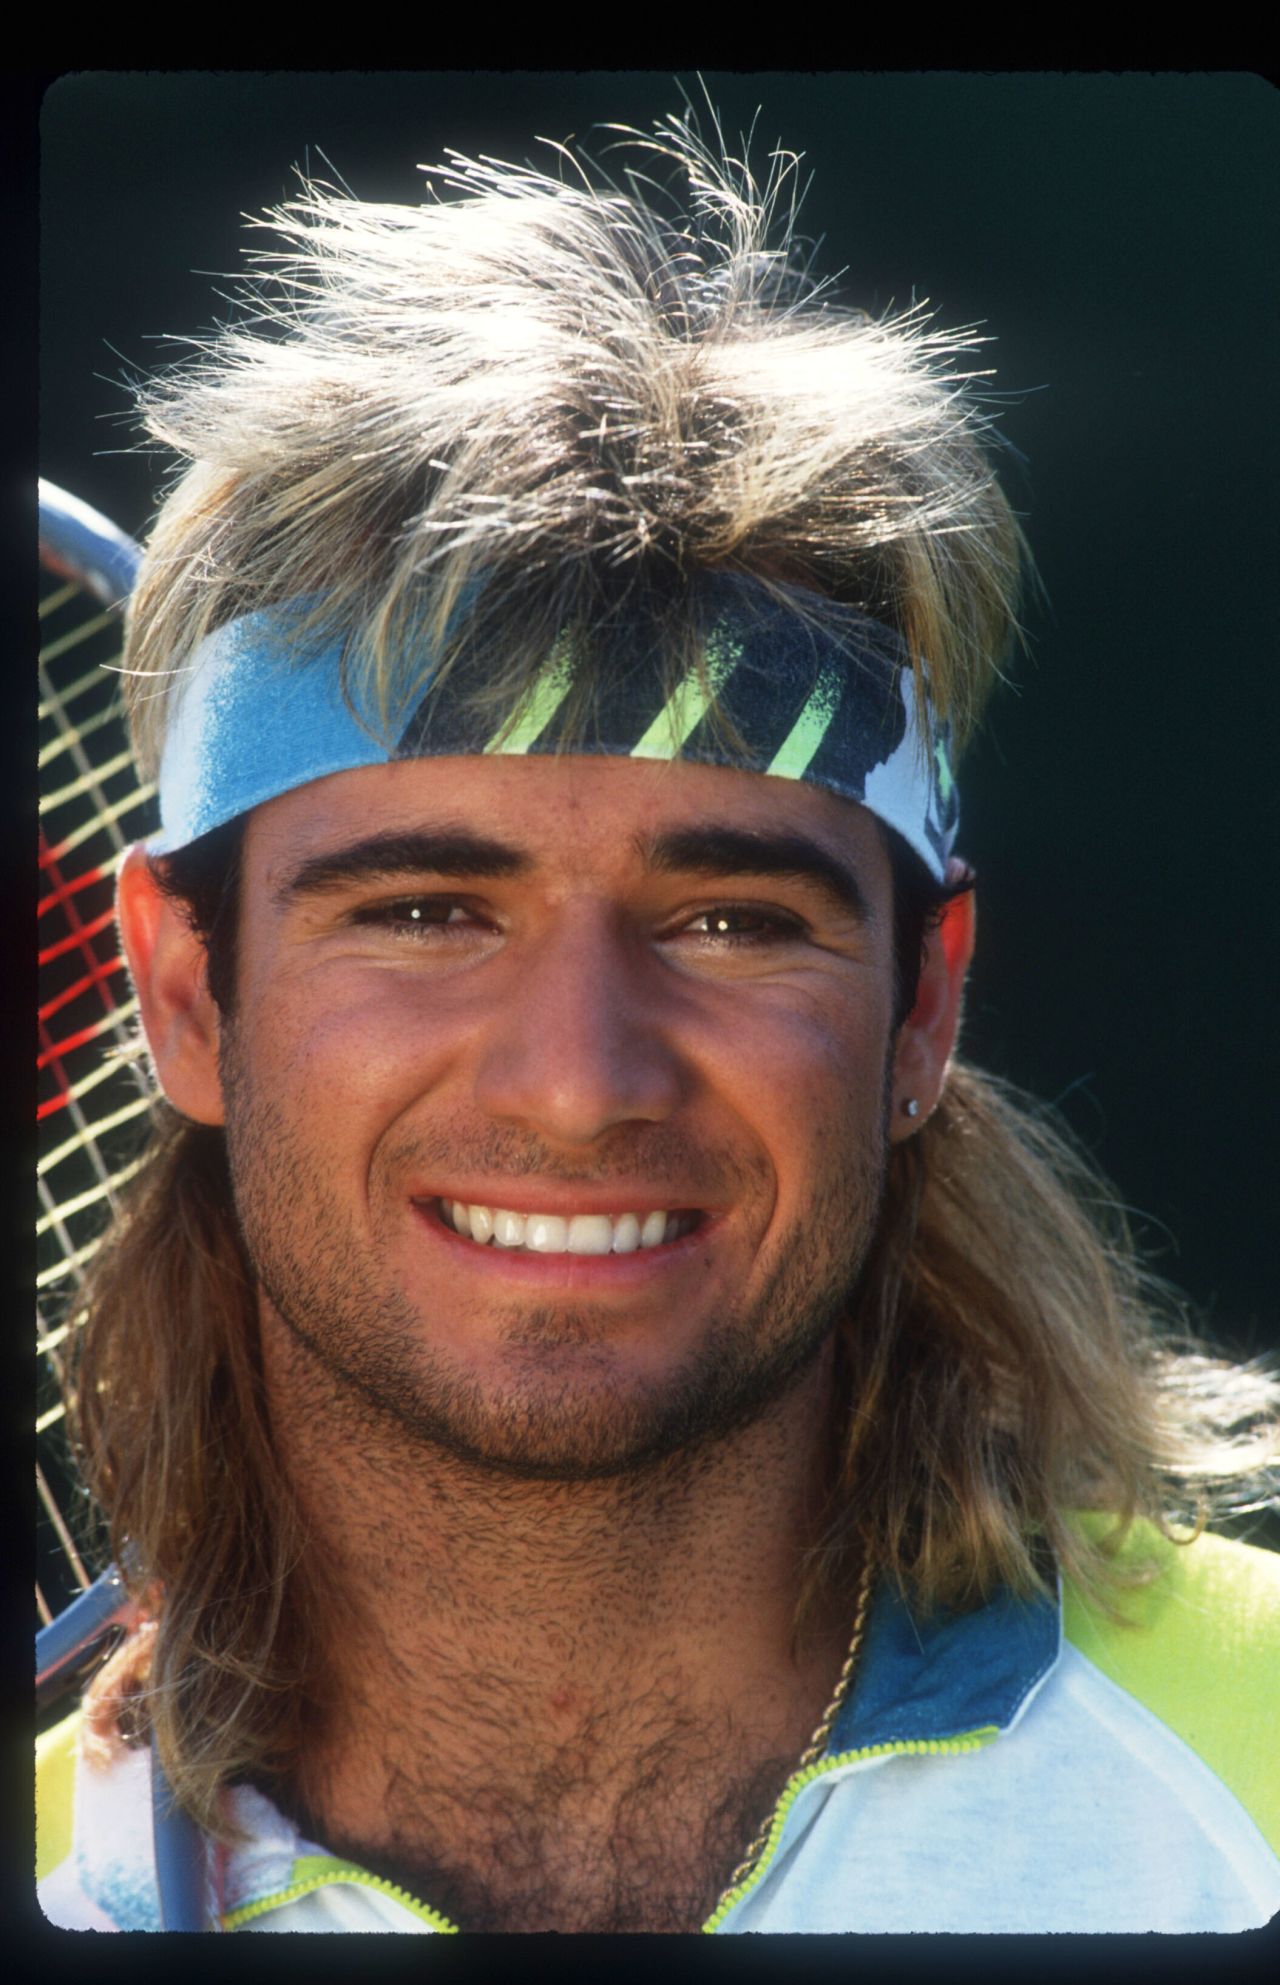 Sometimes you need a headband to control your hair ... in his autobiography "Open," Agassi revealed he sometimes wore a wig during matches and that he'd lost the 1990 French Open finals because of fears his hairpiece was falling apart.